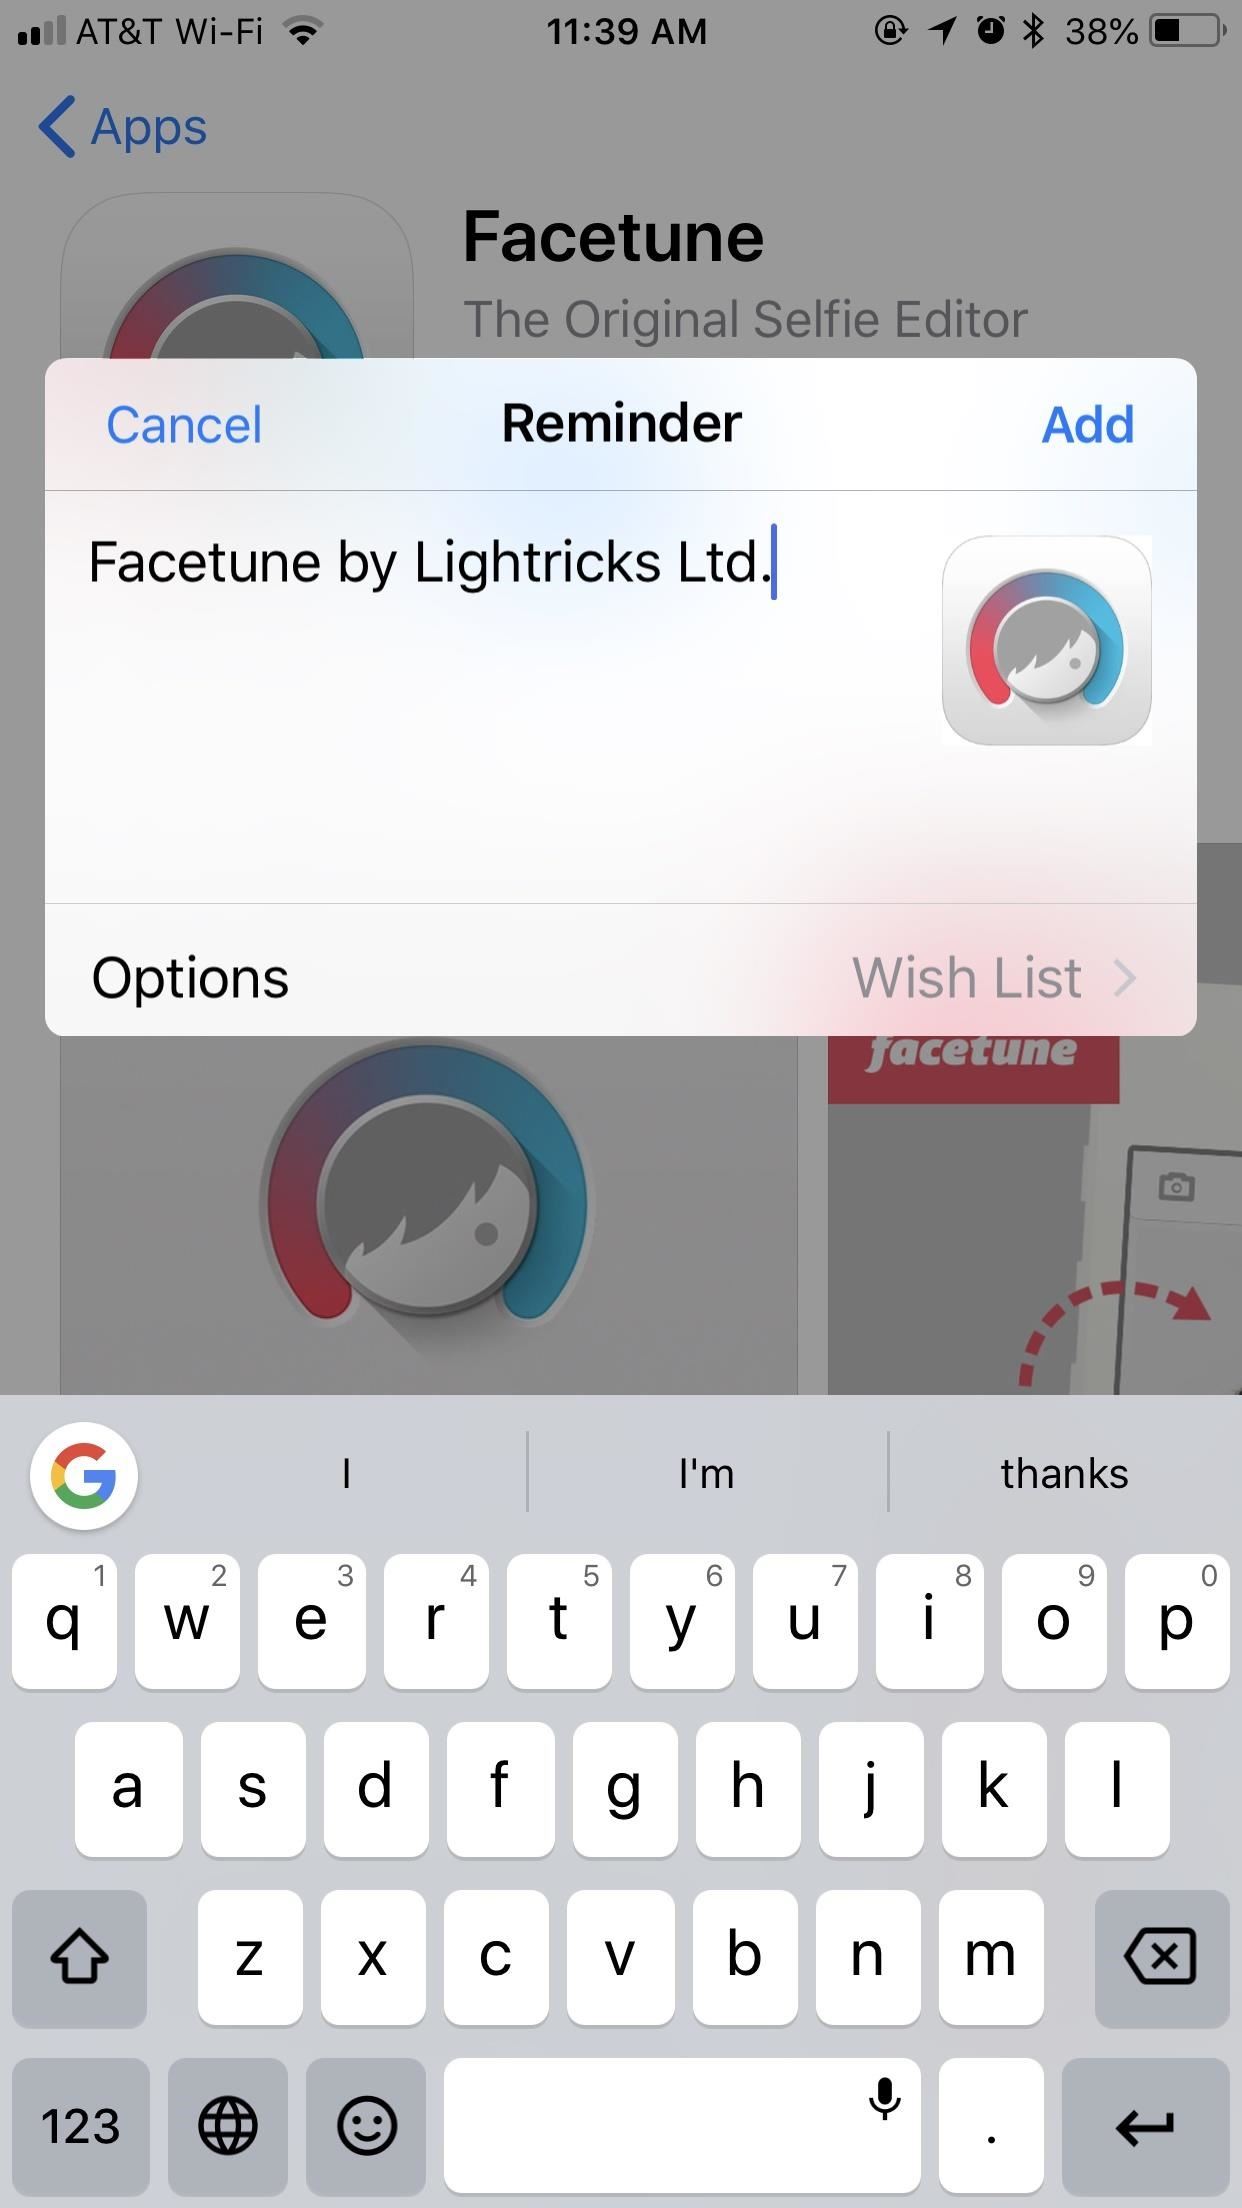 Missing the App Store's Wish List? This Is the Best Alternative for iOS 11